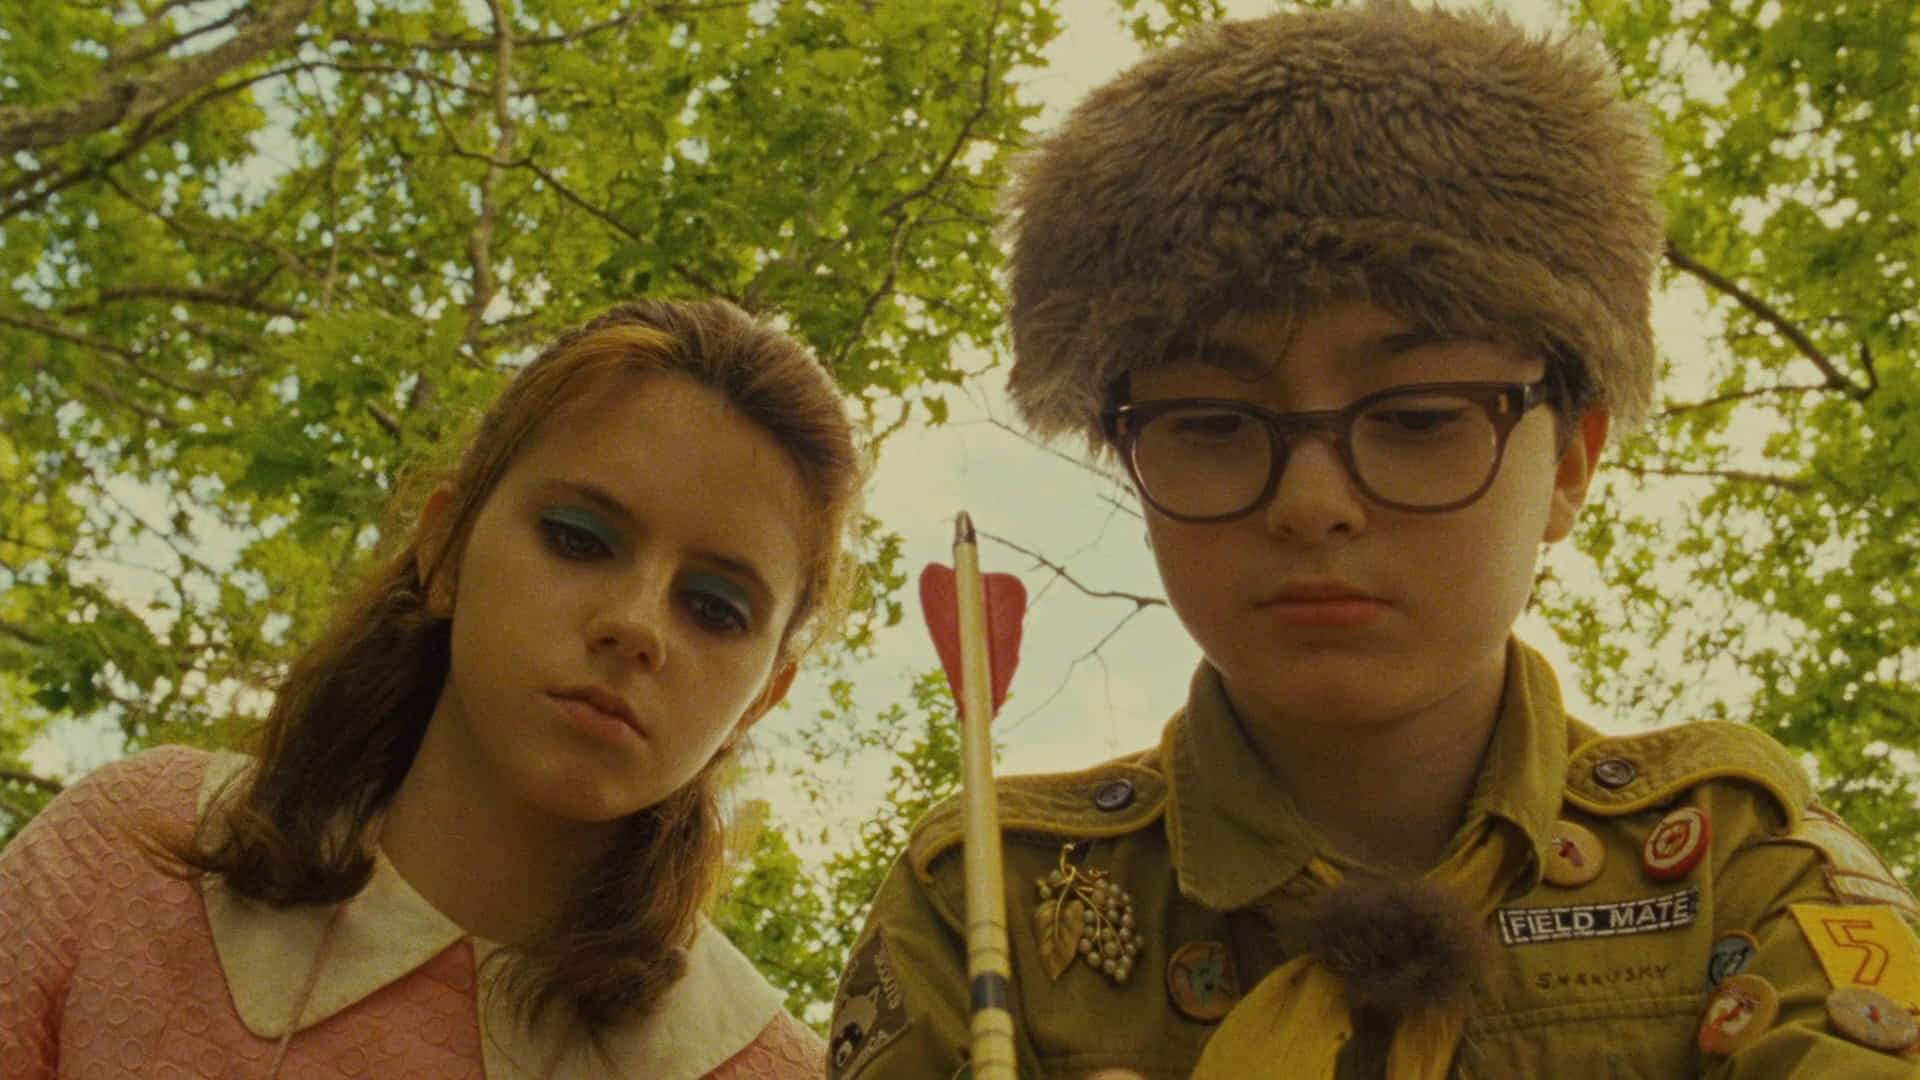 A Mystic Scene From The Movie "moonrise Kingdom" Wallpaper